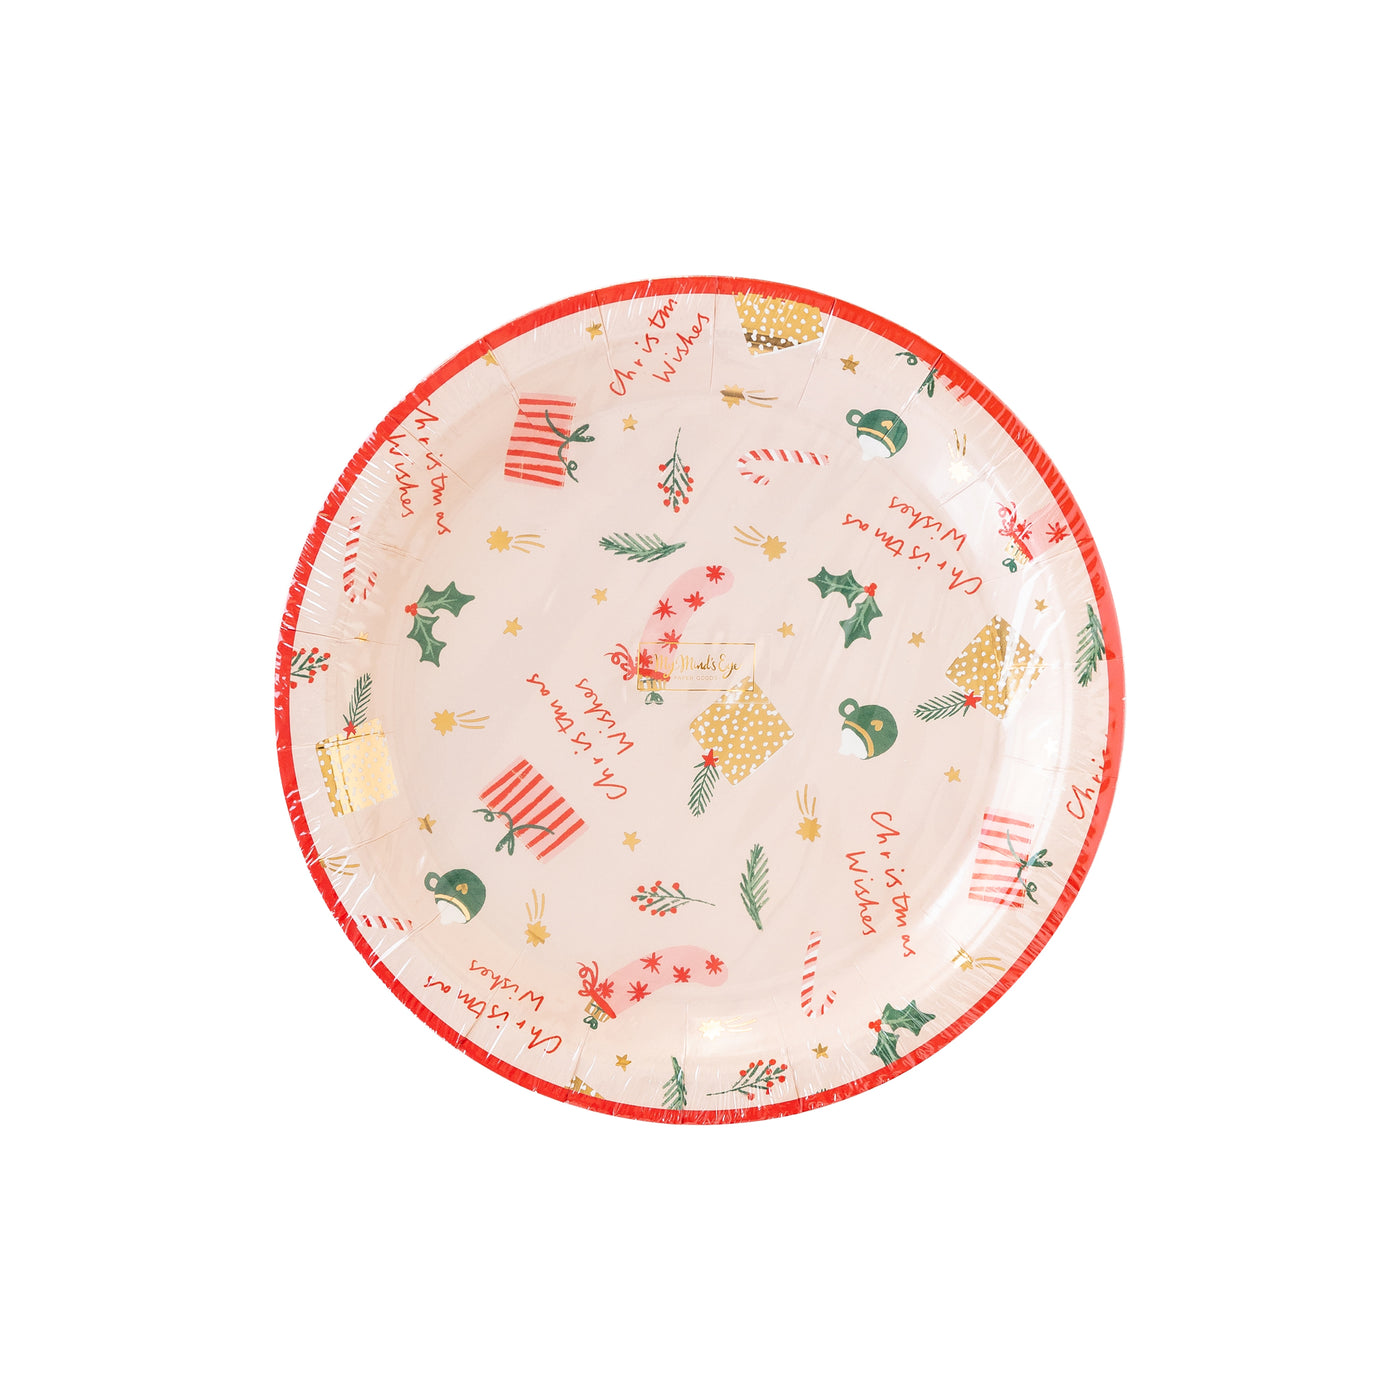 CHW940 - Christmas Wishes Scattered Icons Plate